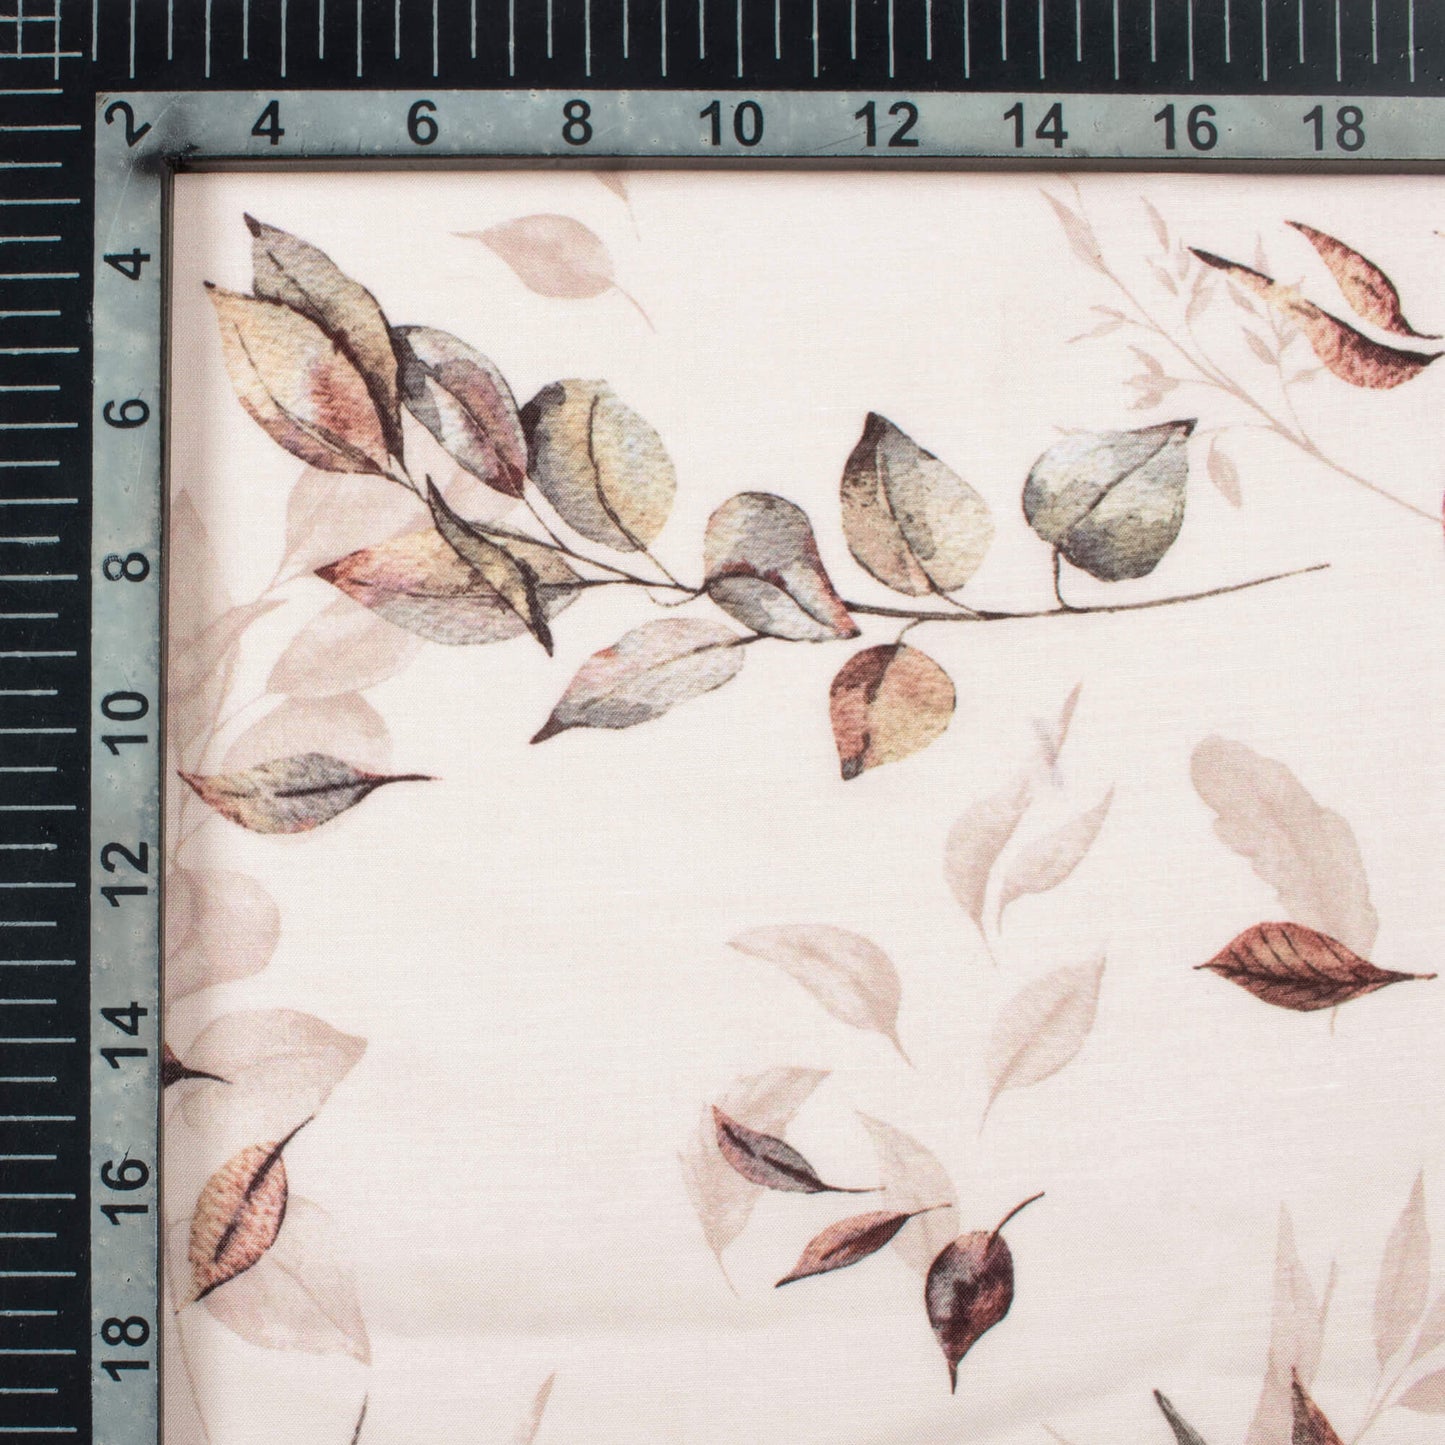 Off White And Brown Leaf Pattern Digital Print Muslin Fabric